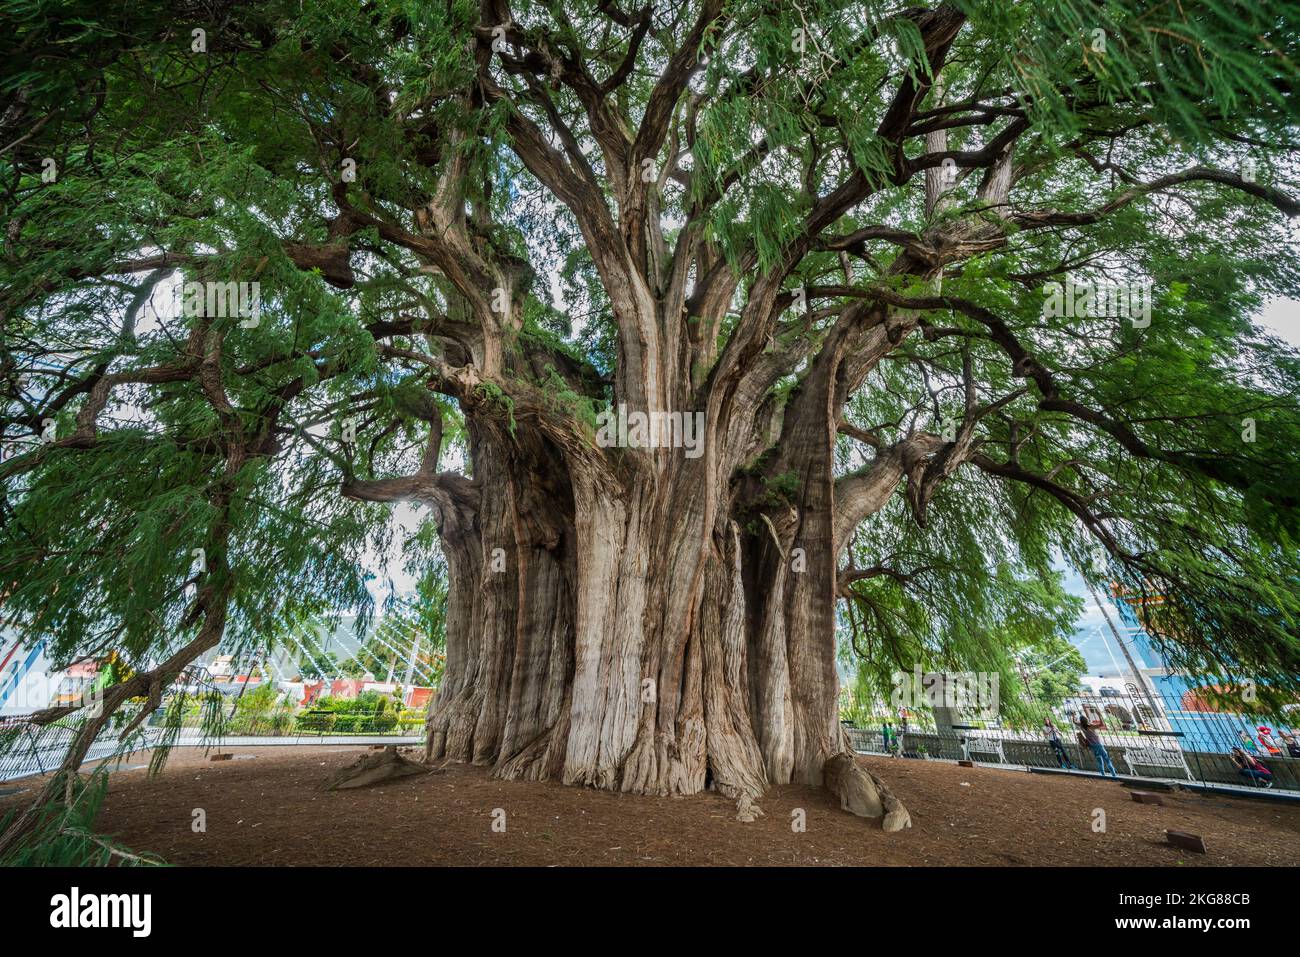 The Tree of Tule in Santa Maria del Tule, Oaxaca Mexico, has the widest trunk of any tree in the world. It is a Montezuma Cypress, estimated to be bet Stock Photo